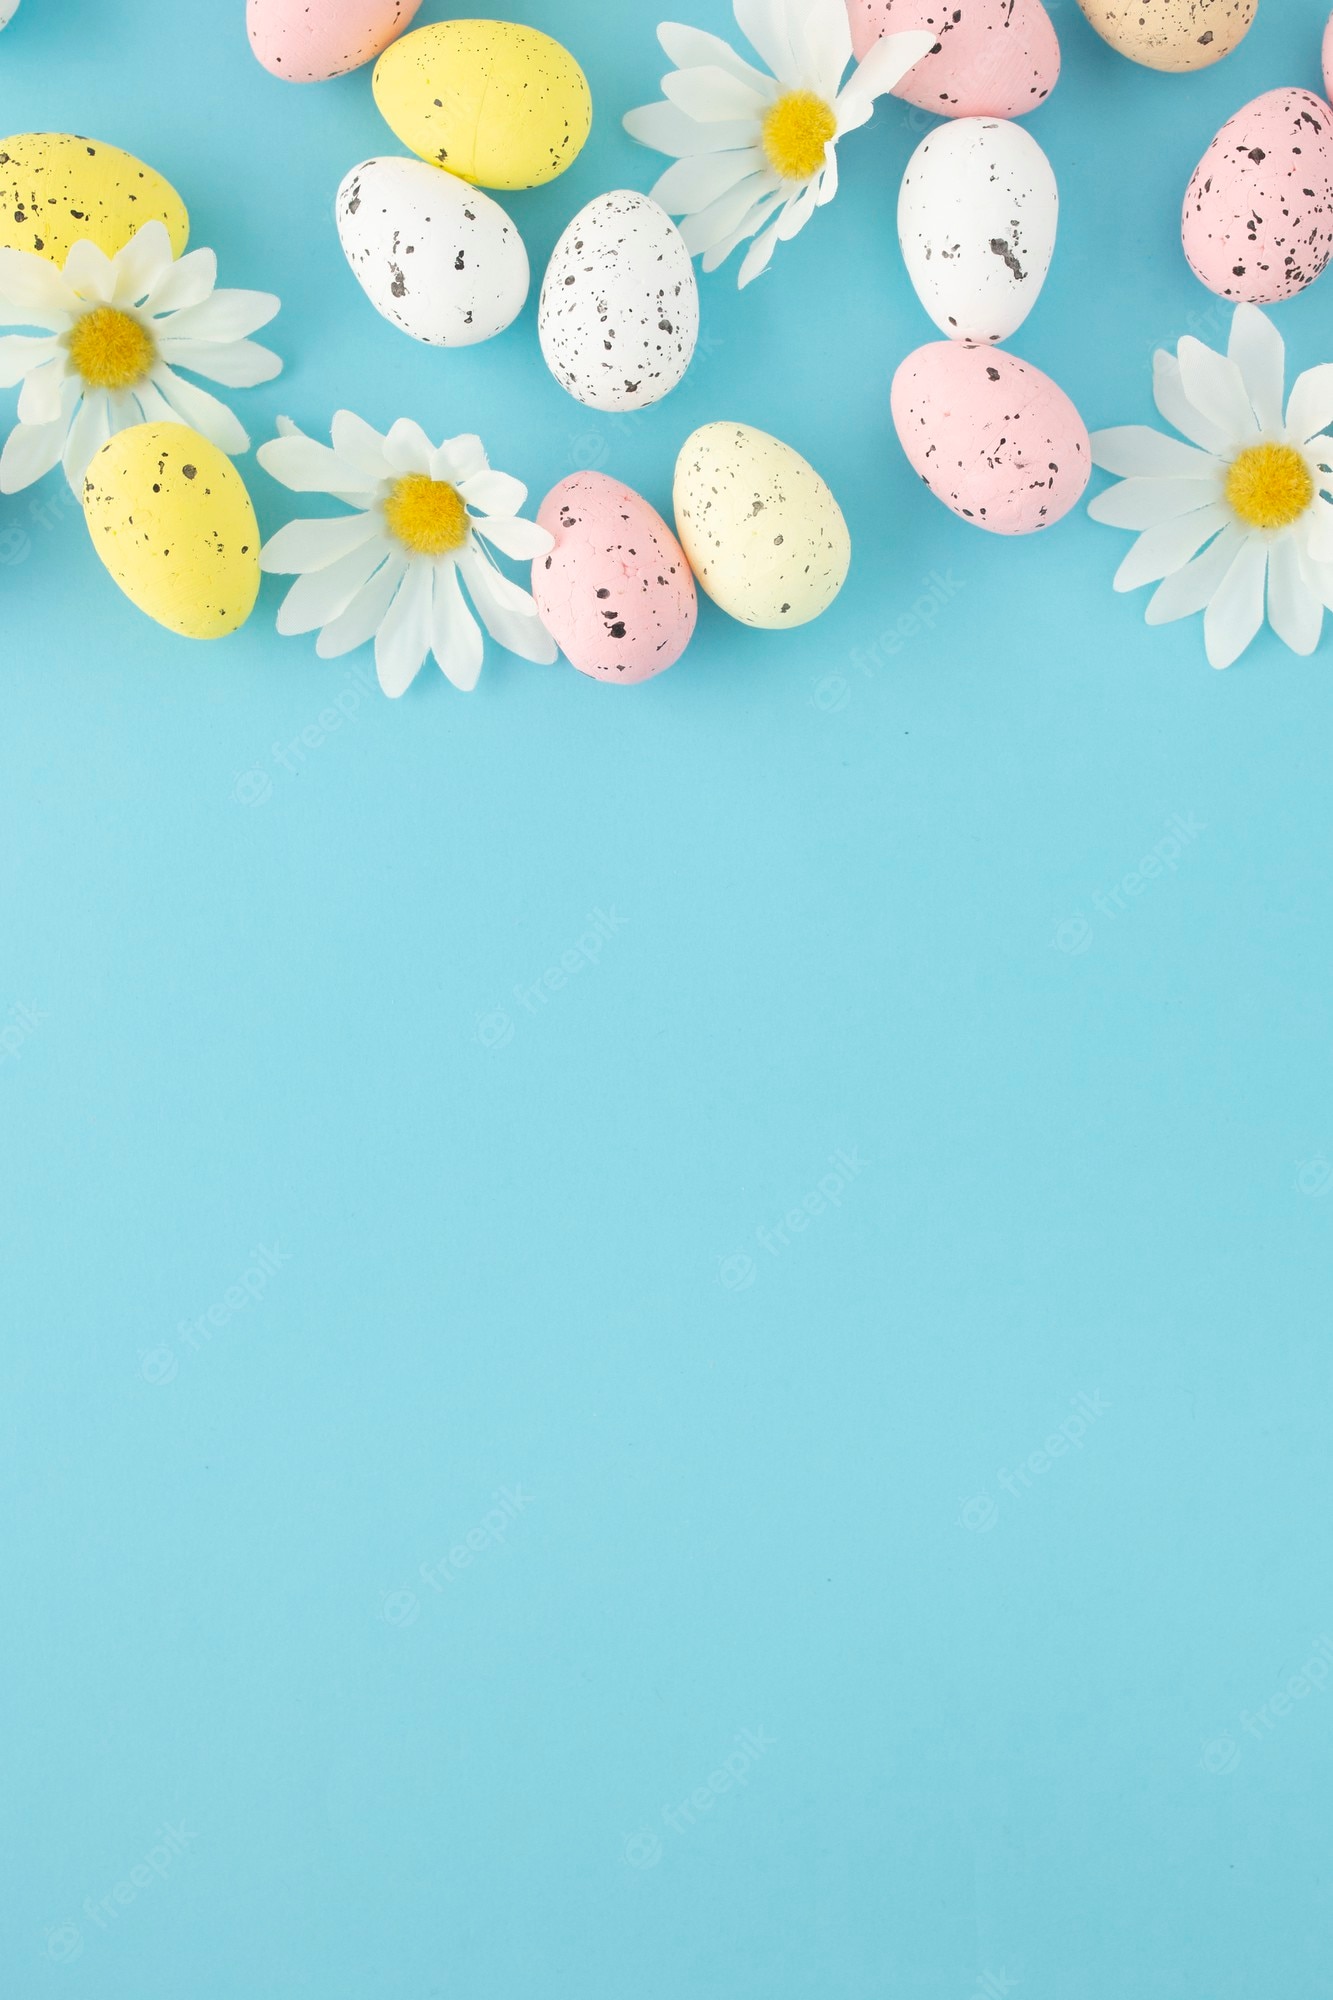 Free Photo. Easter invitation with eggs and daisies on a blue background with copy space